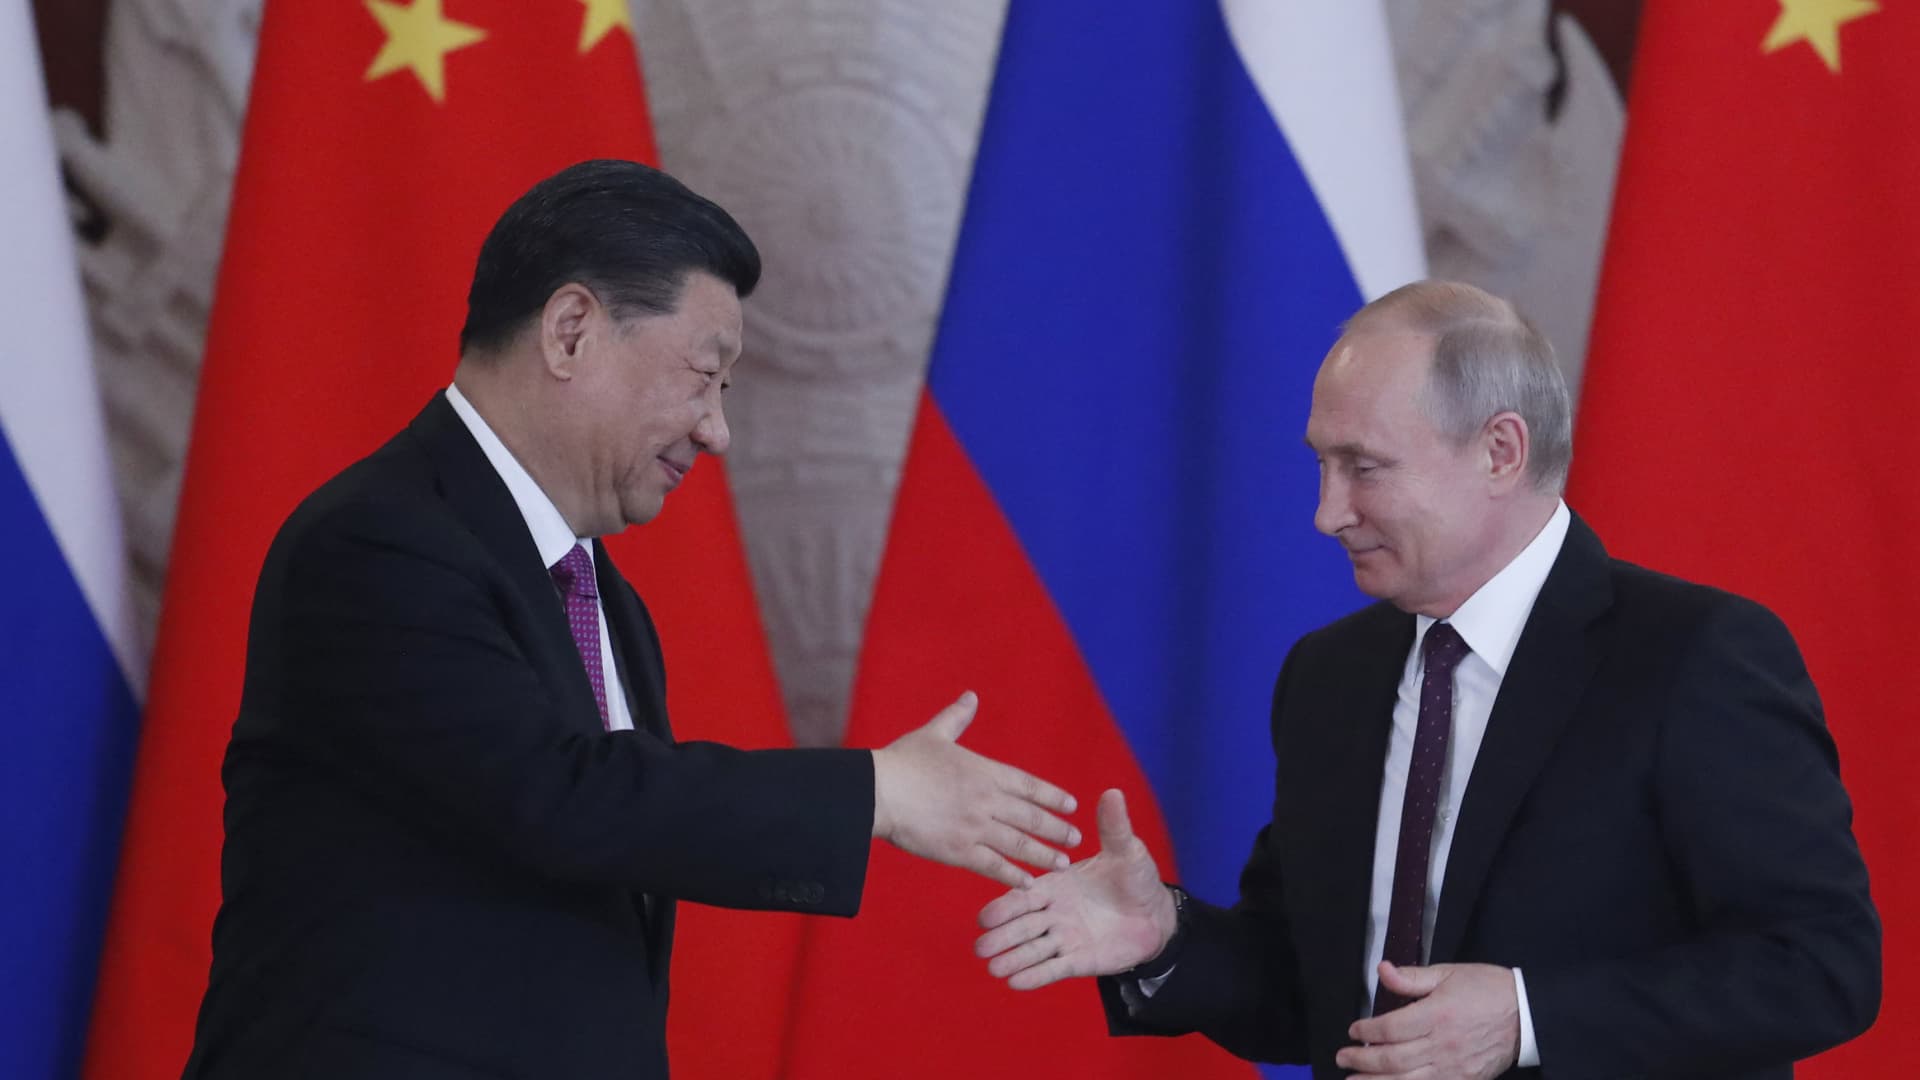 Russian President Vladimir Putin and his Chinese counterpart Xi Jinping shake hands at the end of a joint press conference following their talks at the Kremlin in Moscow on June 5, 2019.